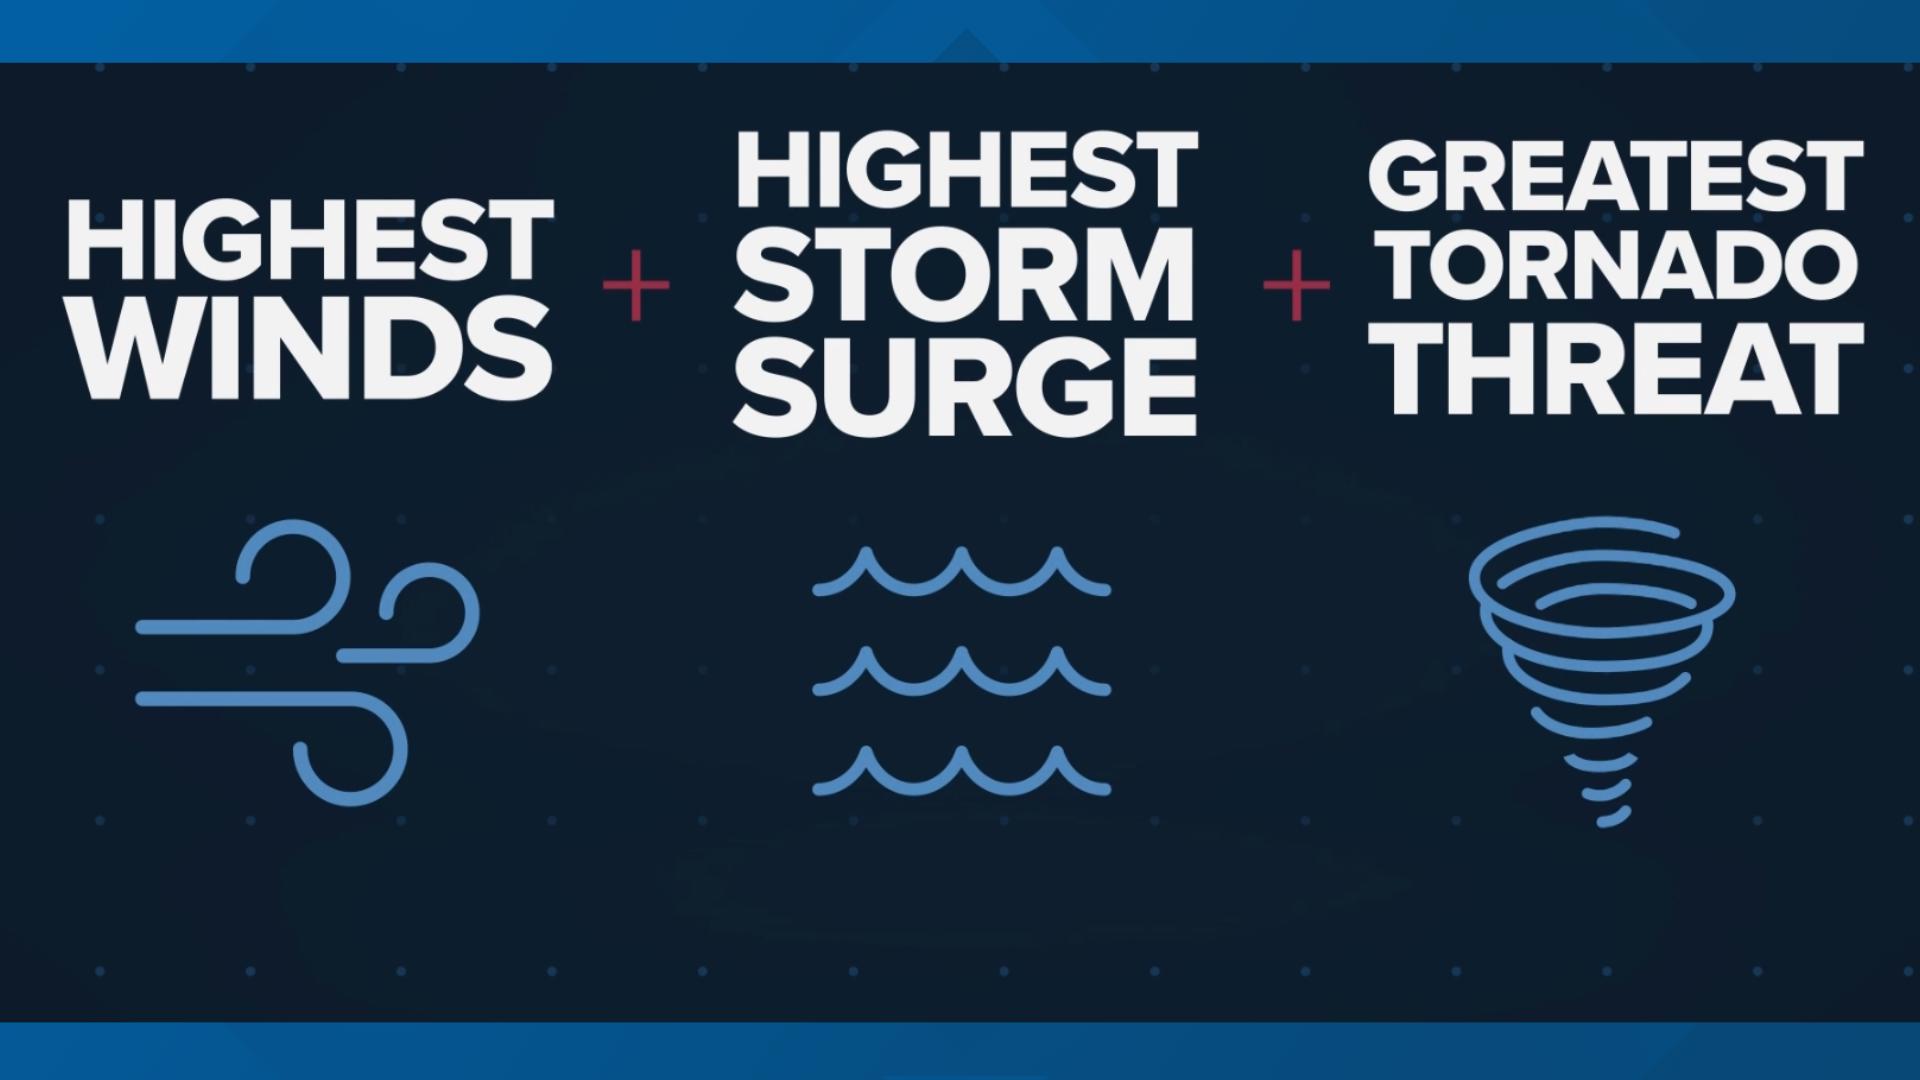 The dirty side of a tropical system refers to the part of a storm where you'll find the highest winds, highest storm surge, and greatest tornado threat.